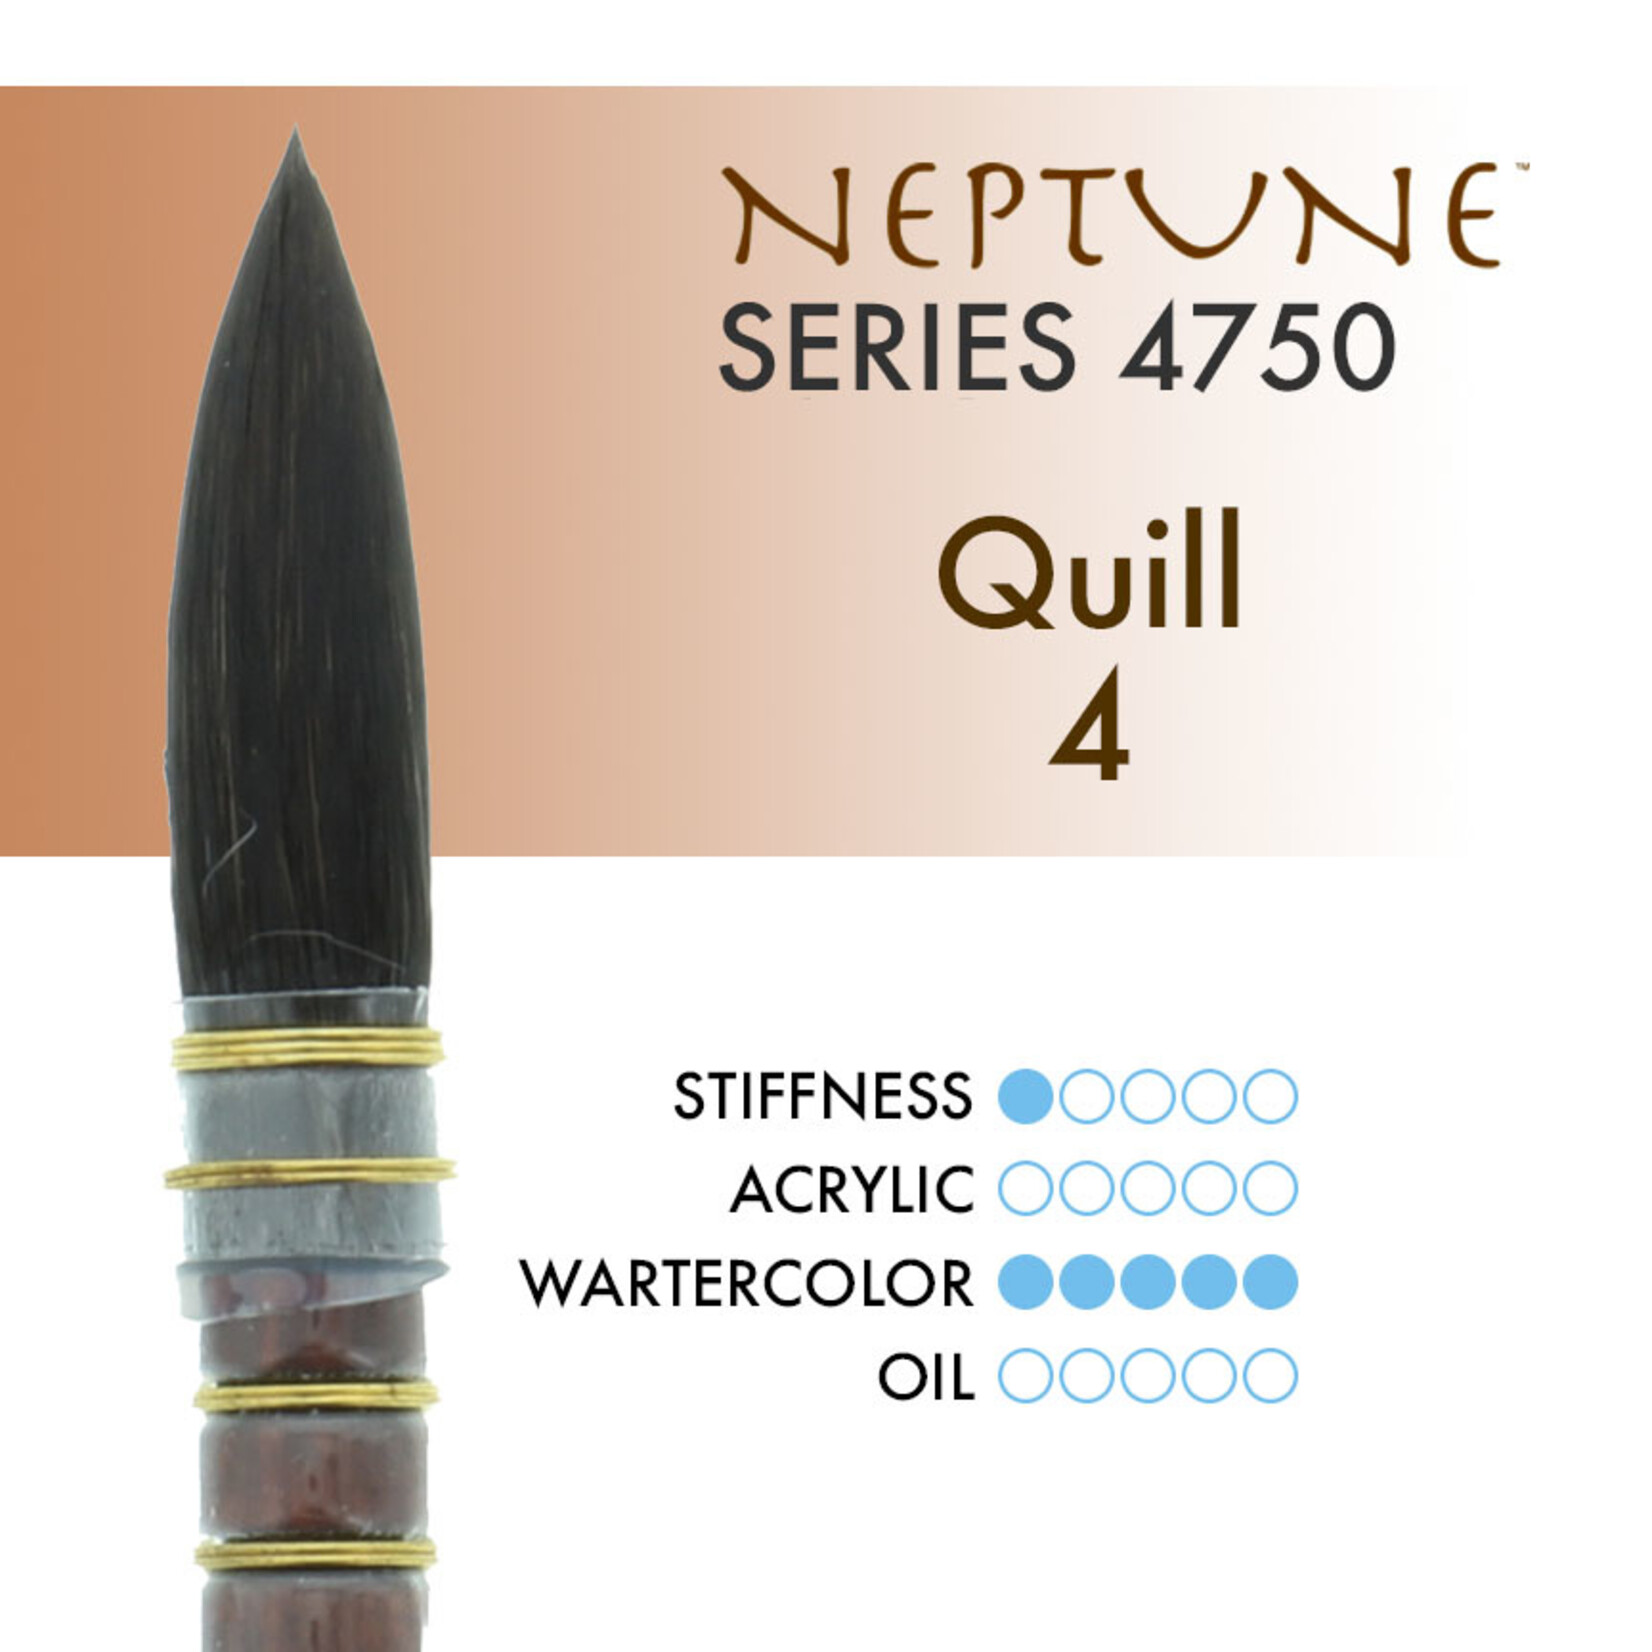 Princeton Neptune Syn Squirrel Quill 4